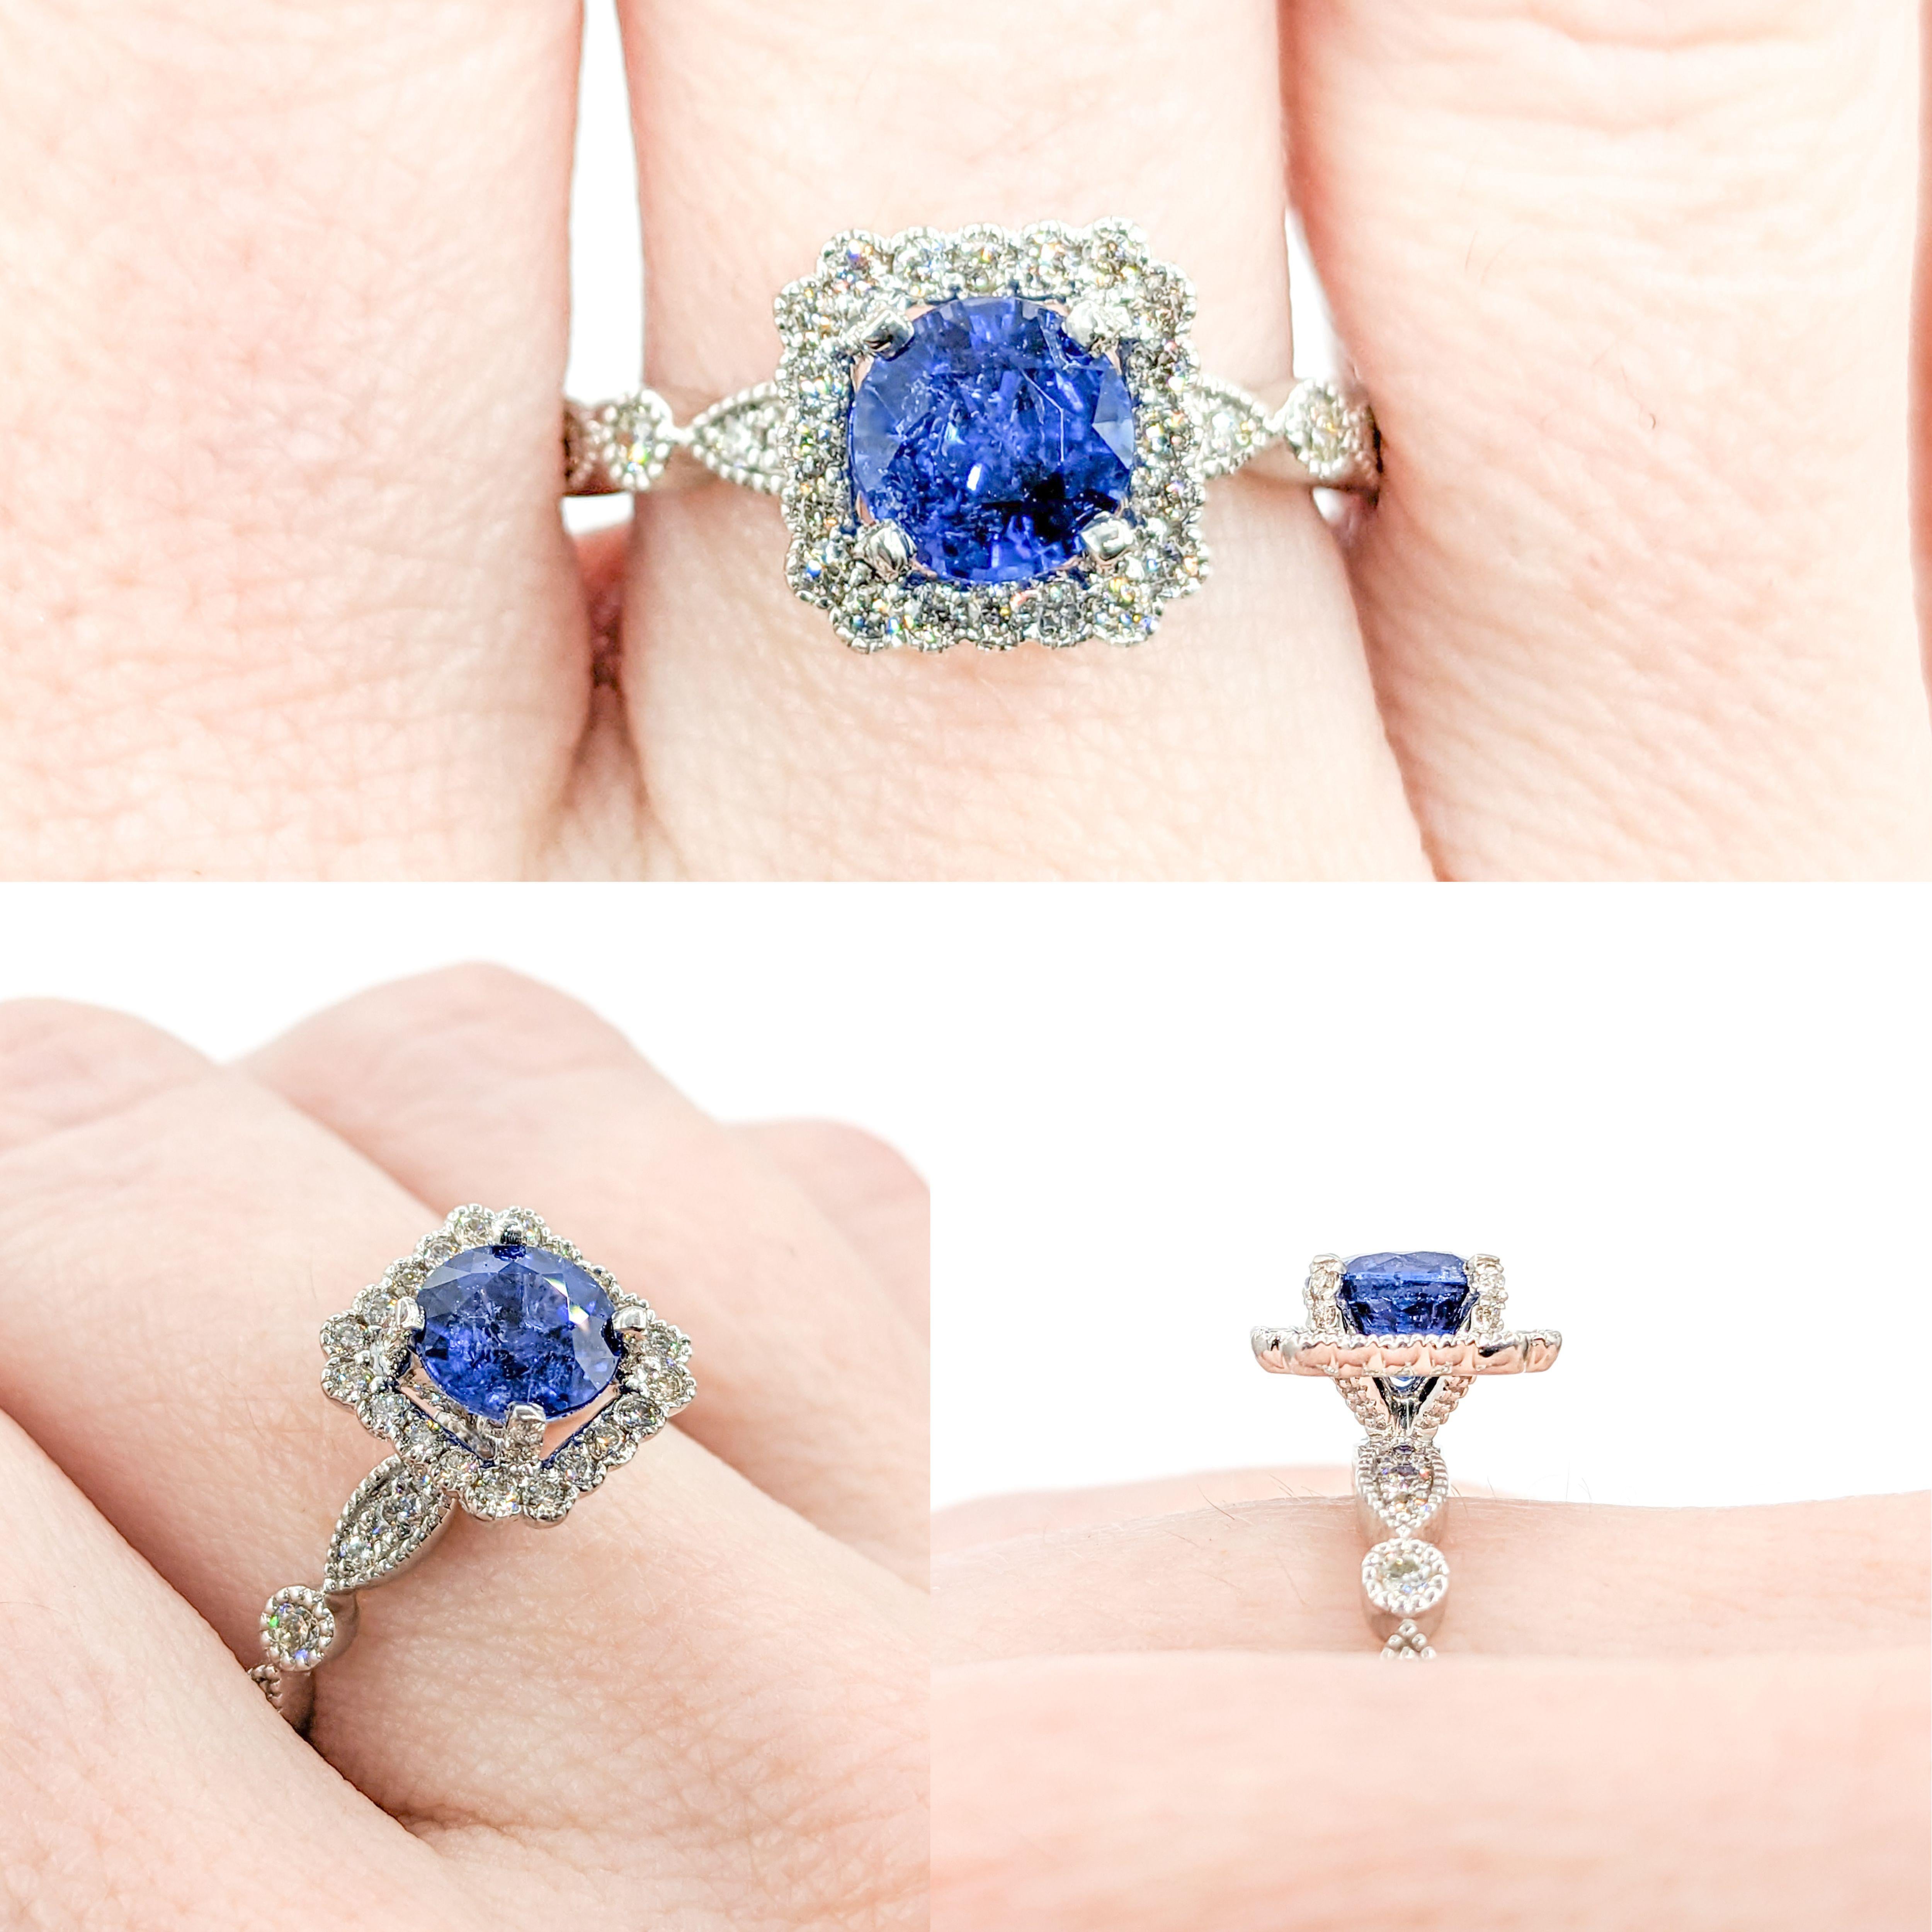 Vibrant Blue Sapphire & Diamond Engagement Ring in Platinum

Crafted in 950pt platinum, this stunning ring is an exquisite piece of jewelry that you'll treasure for a lifetime. The ring features 0.45 carats total weight of diamonds that sparkle with